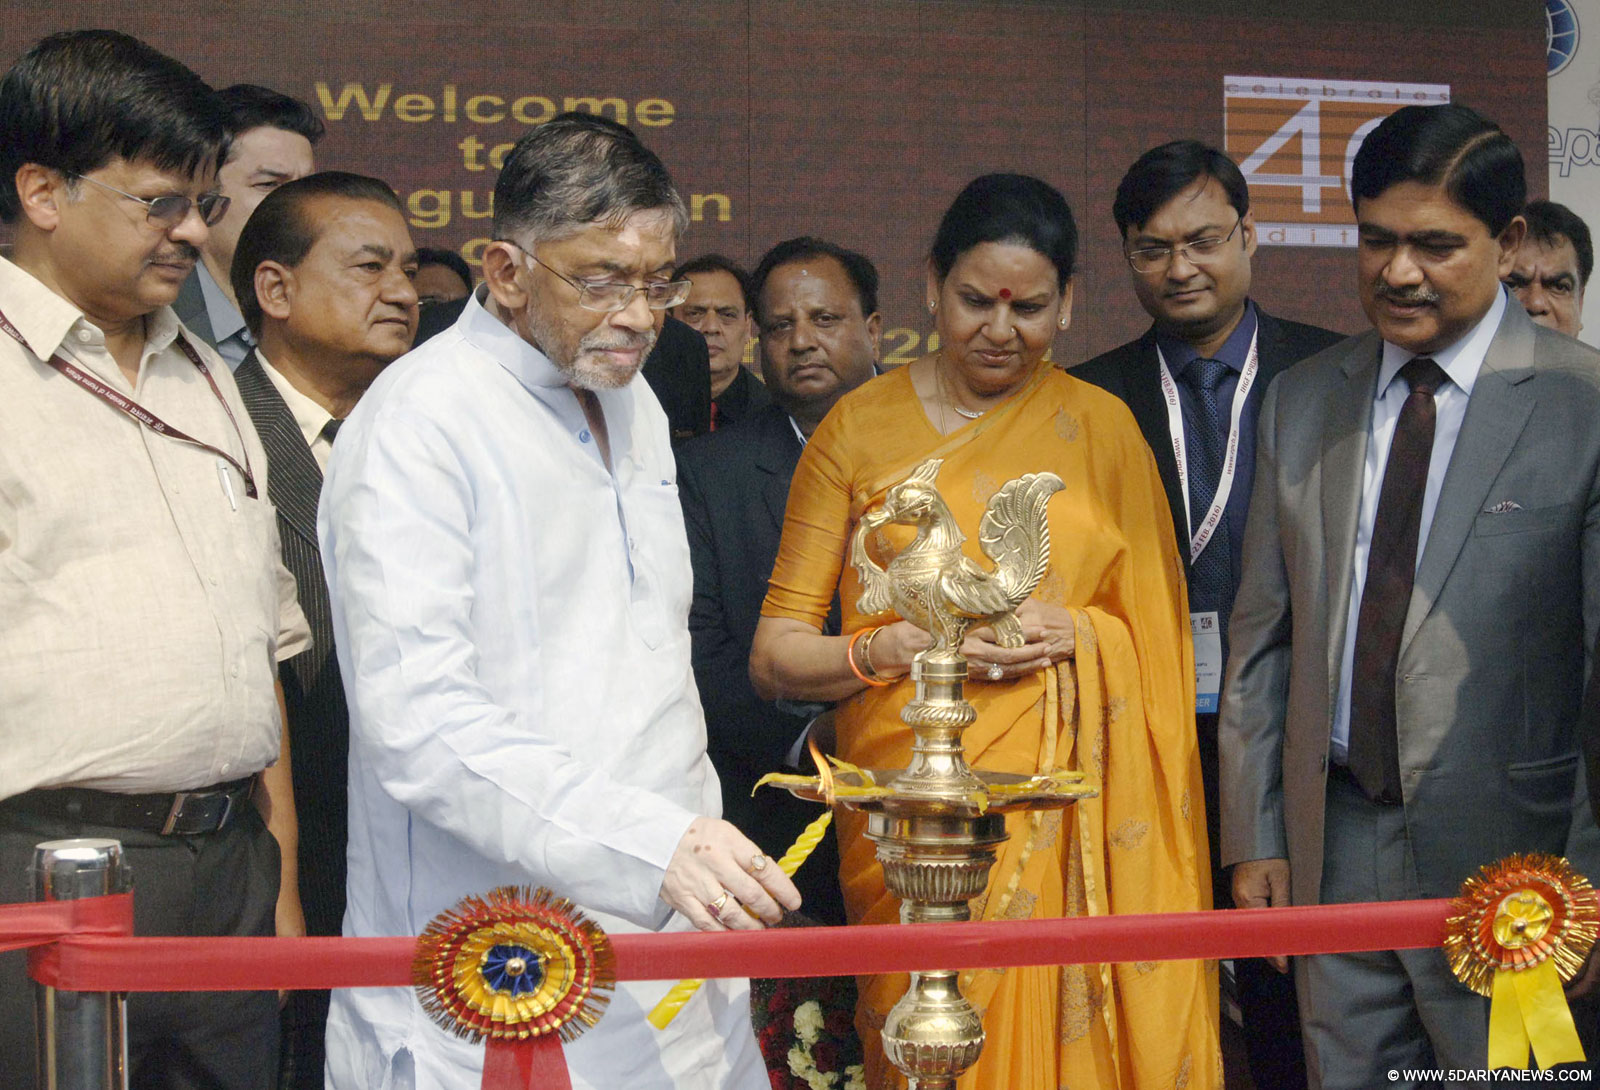 The Minister of State for Textiles (Independent Charge), Shri Santosh Kumar Gangwar lighting the lamp to inaugurate the 40th edition of IHGF Delhi Fair–Autumn 2015, in Greater Noida on October 14, 2015. The Secretary, Textiles, Dr. Sanjay Kumar Panda and other dignitaries are also seen.